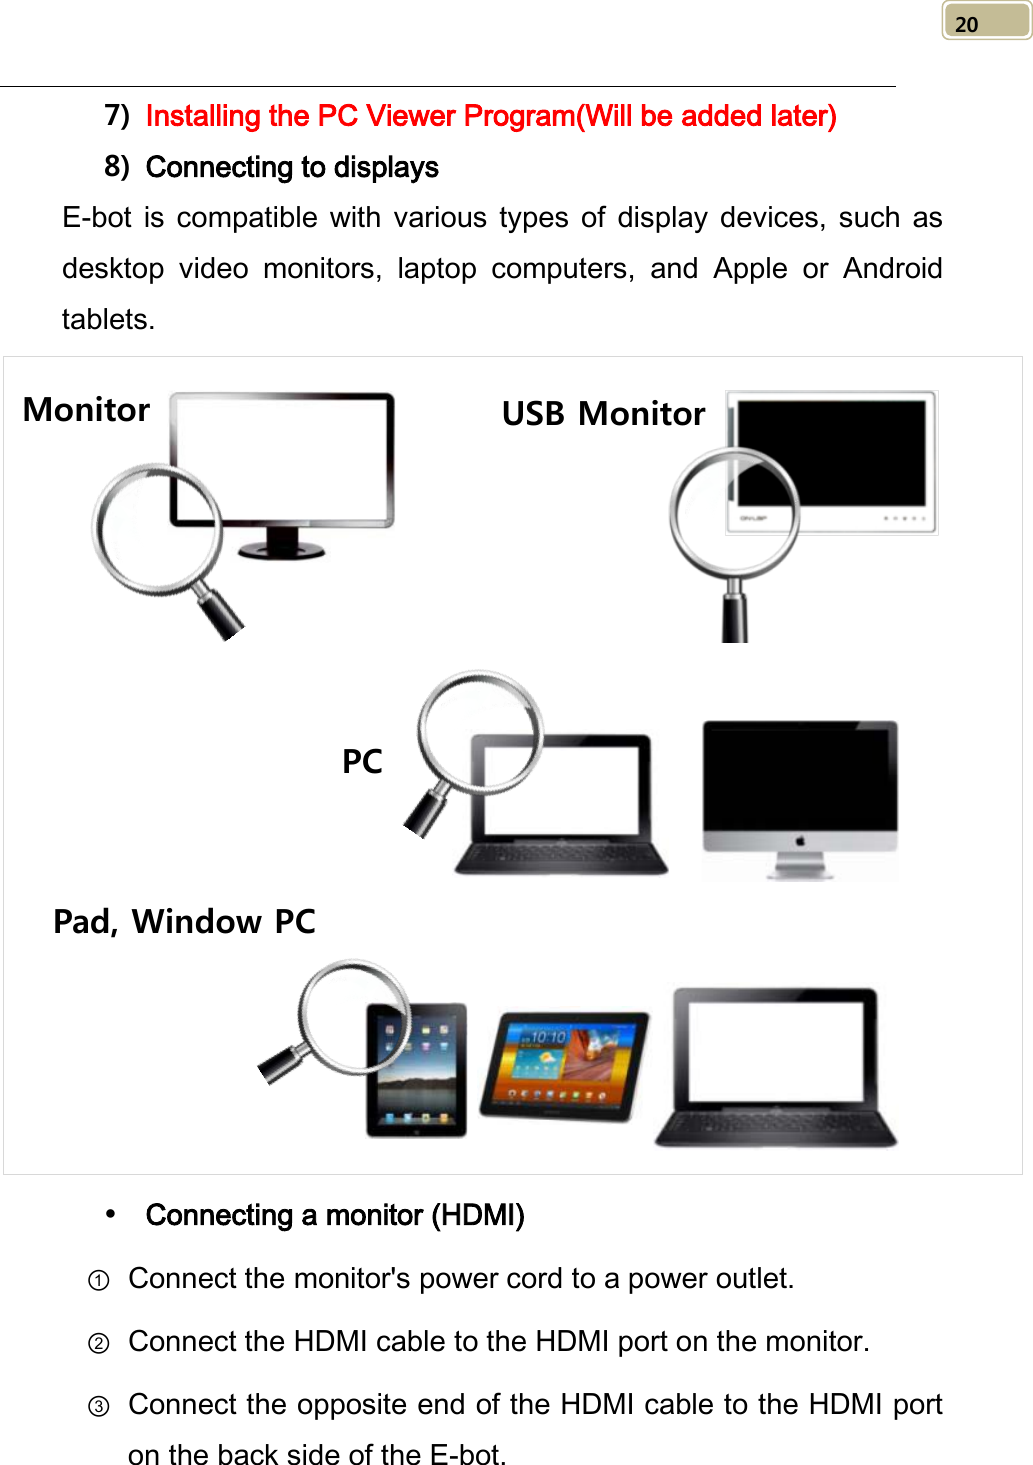   20 7) Installing the PC Viewer Program(Will be added later) 8) Connecting to displays E-bot is compatible with various types of display devices, such as desktop video monitors, laptop computers, and Apple or Android tablets.   Connecting a monitor (HDMI) ① Connect the monitor&apos;s power cord to a power outlet. ② Connect the HDMI cable to the HDMI port on the monitor. ③ Connect the opposite end of the HDMI cable to the HDMI port on the back side of the E-bot. Monitor USB Monitor PC Pad, Window PC 